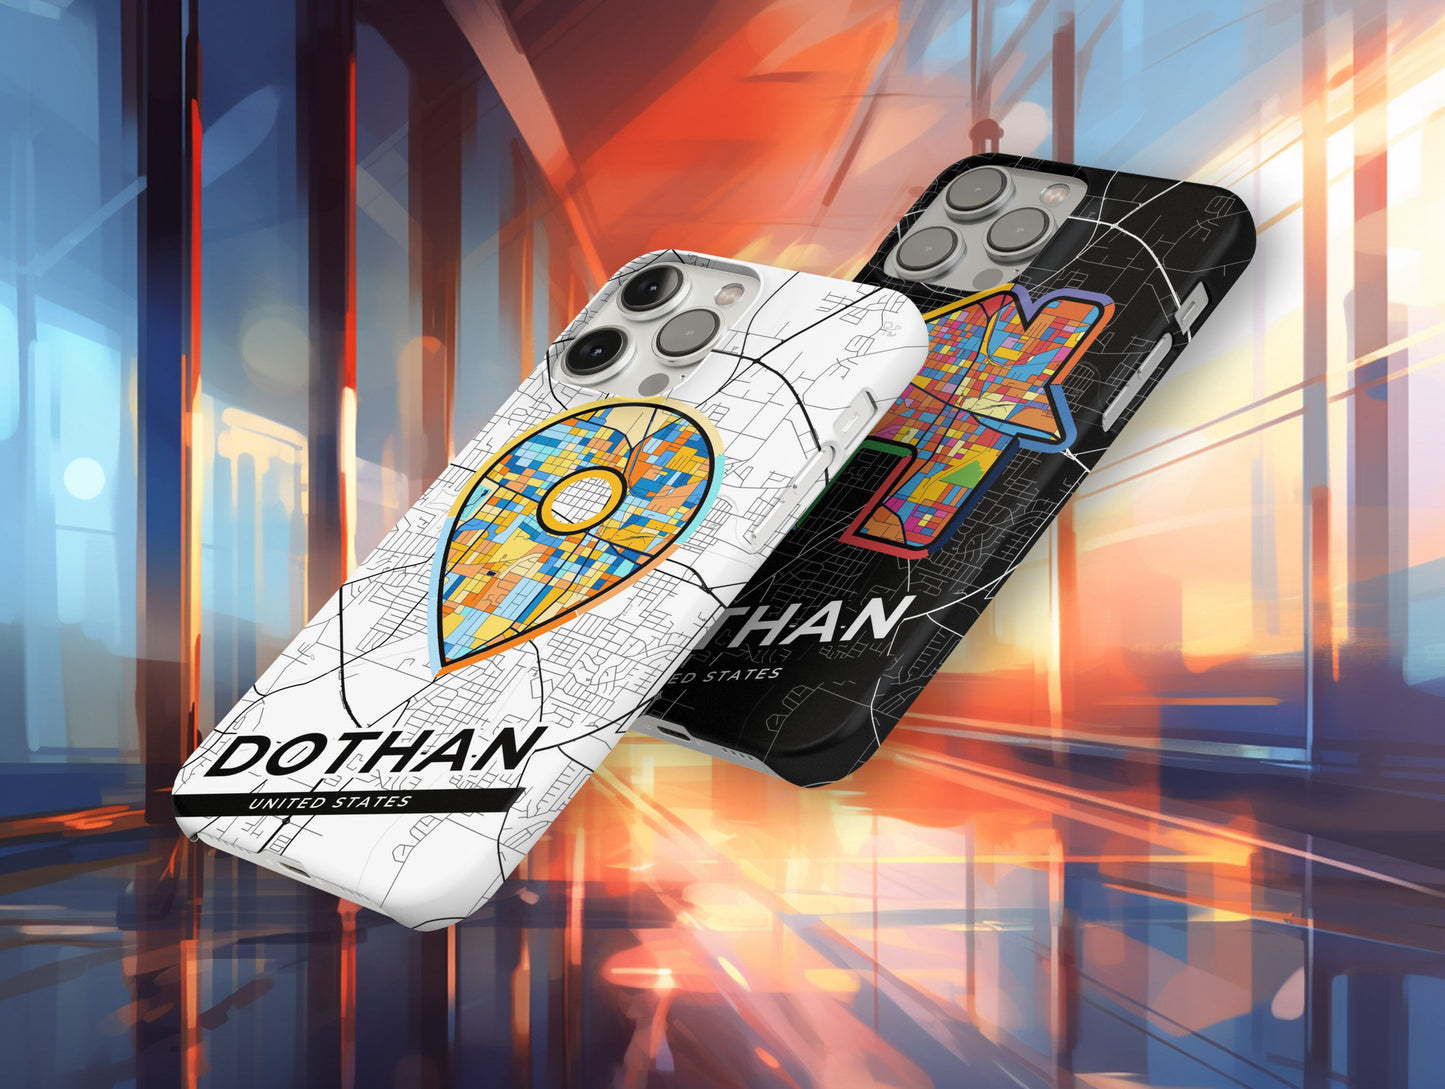 Dothan Alabama slim phone case with colorful icon. Birthday, wedding or housewarming gift. Couple match cases.